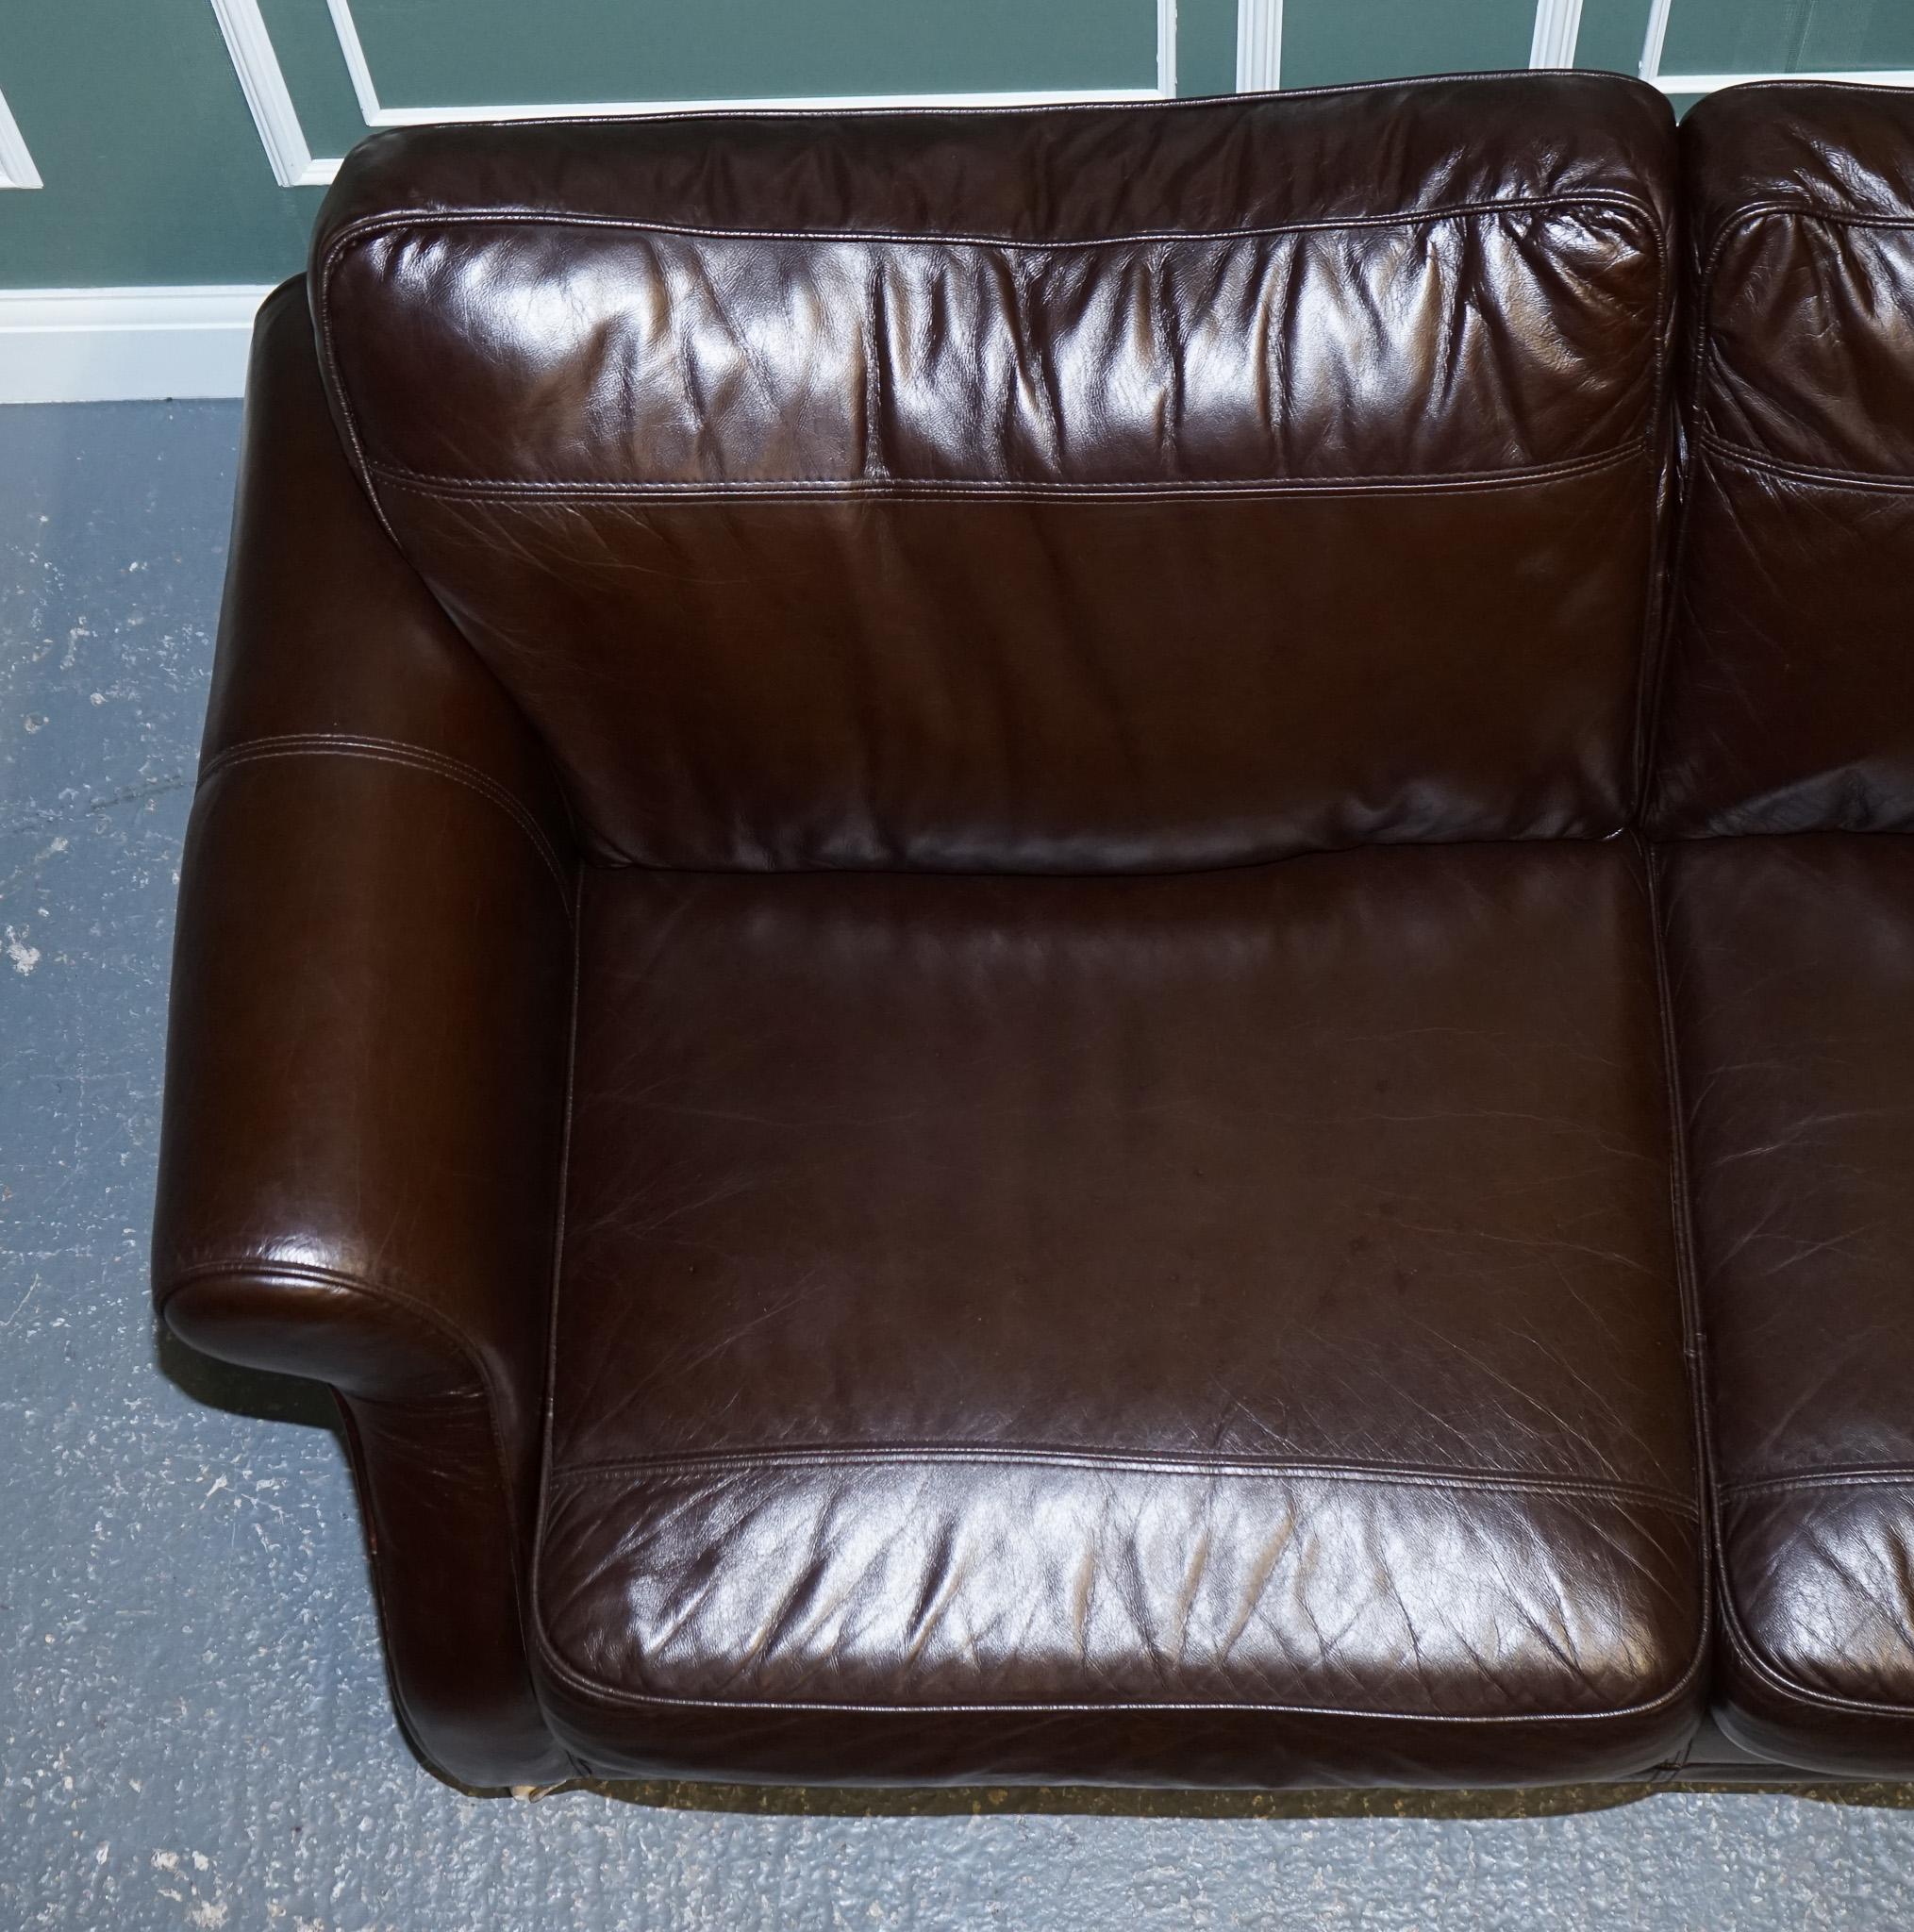 SOFA VINTAGE STUNNiNG CHOCOLATE BROWN LEATHER 2 TO 3 SEATER en vente 2